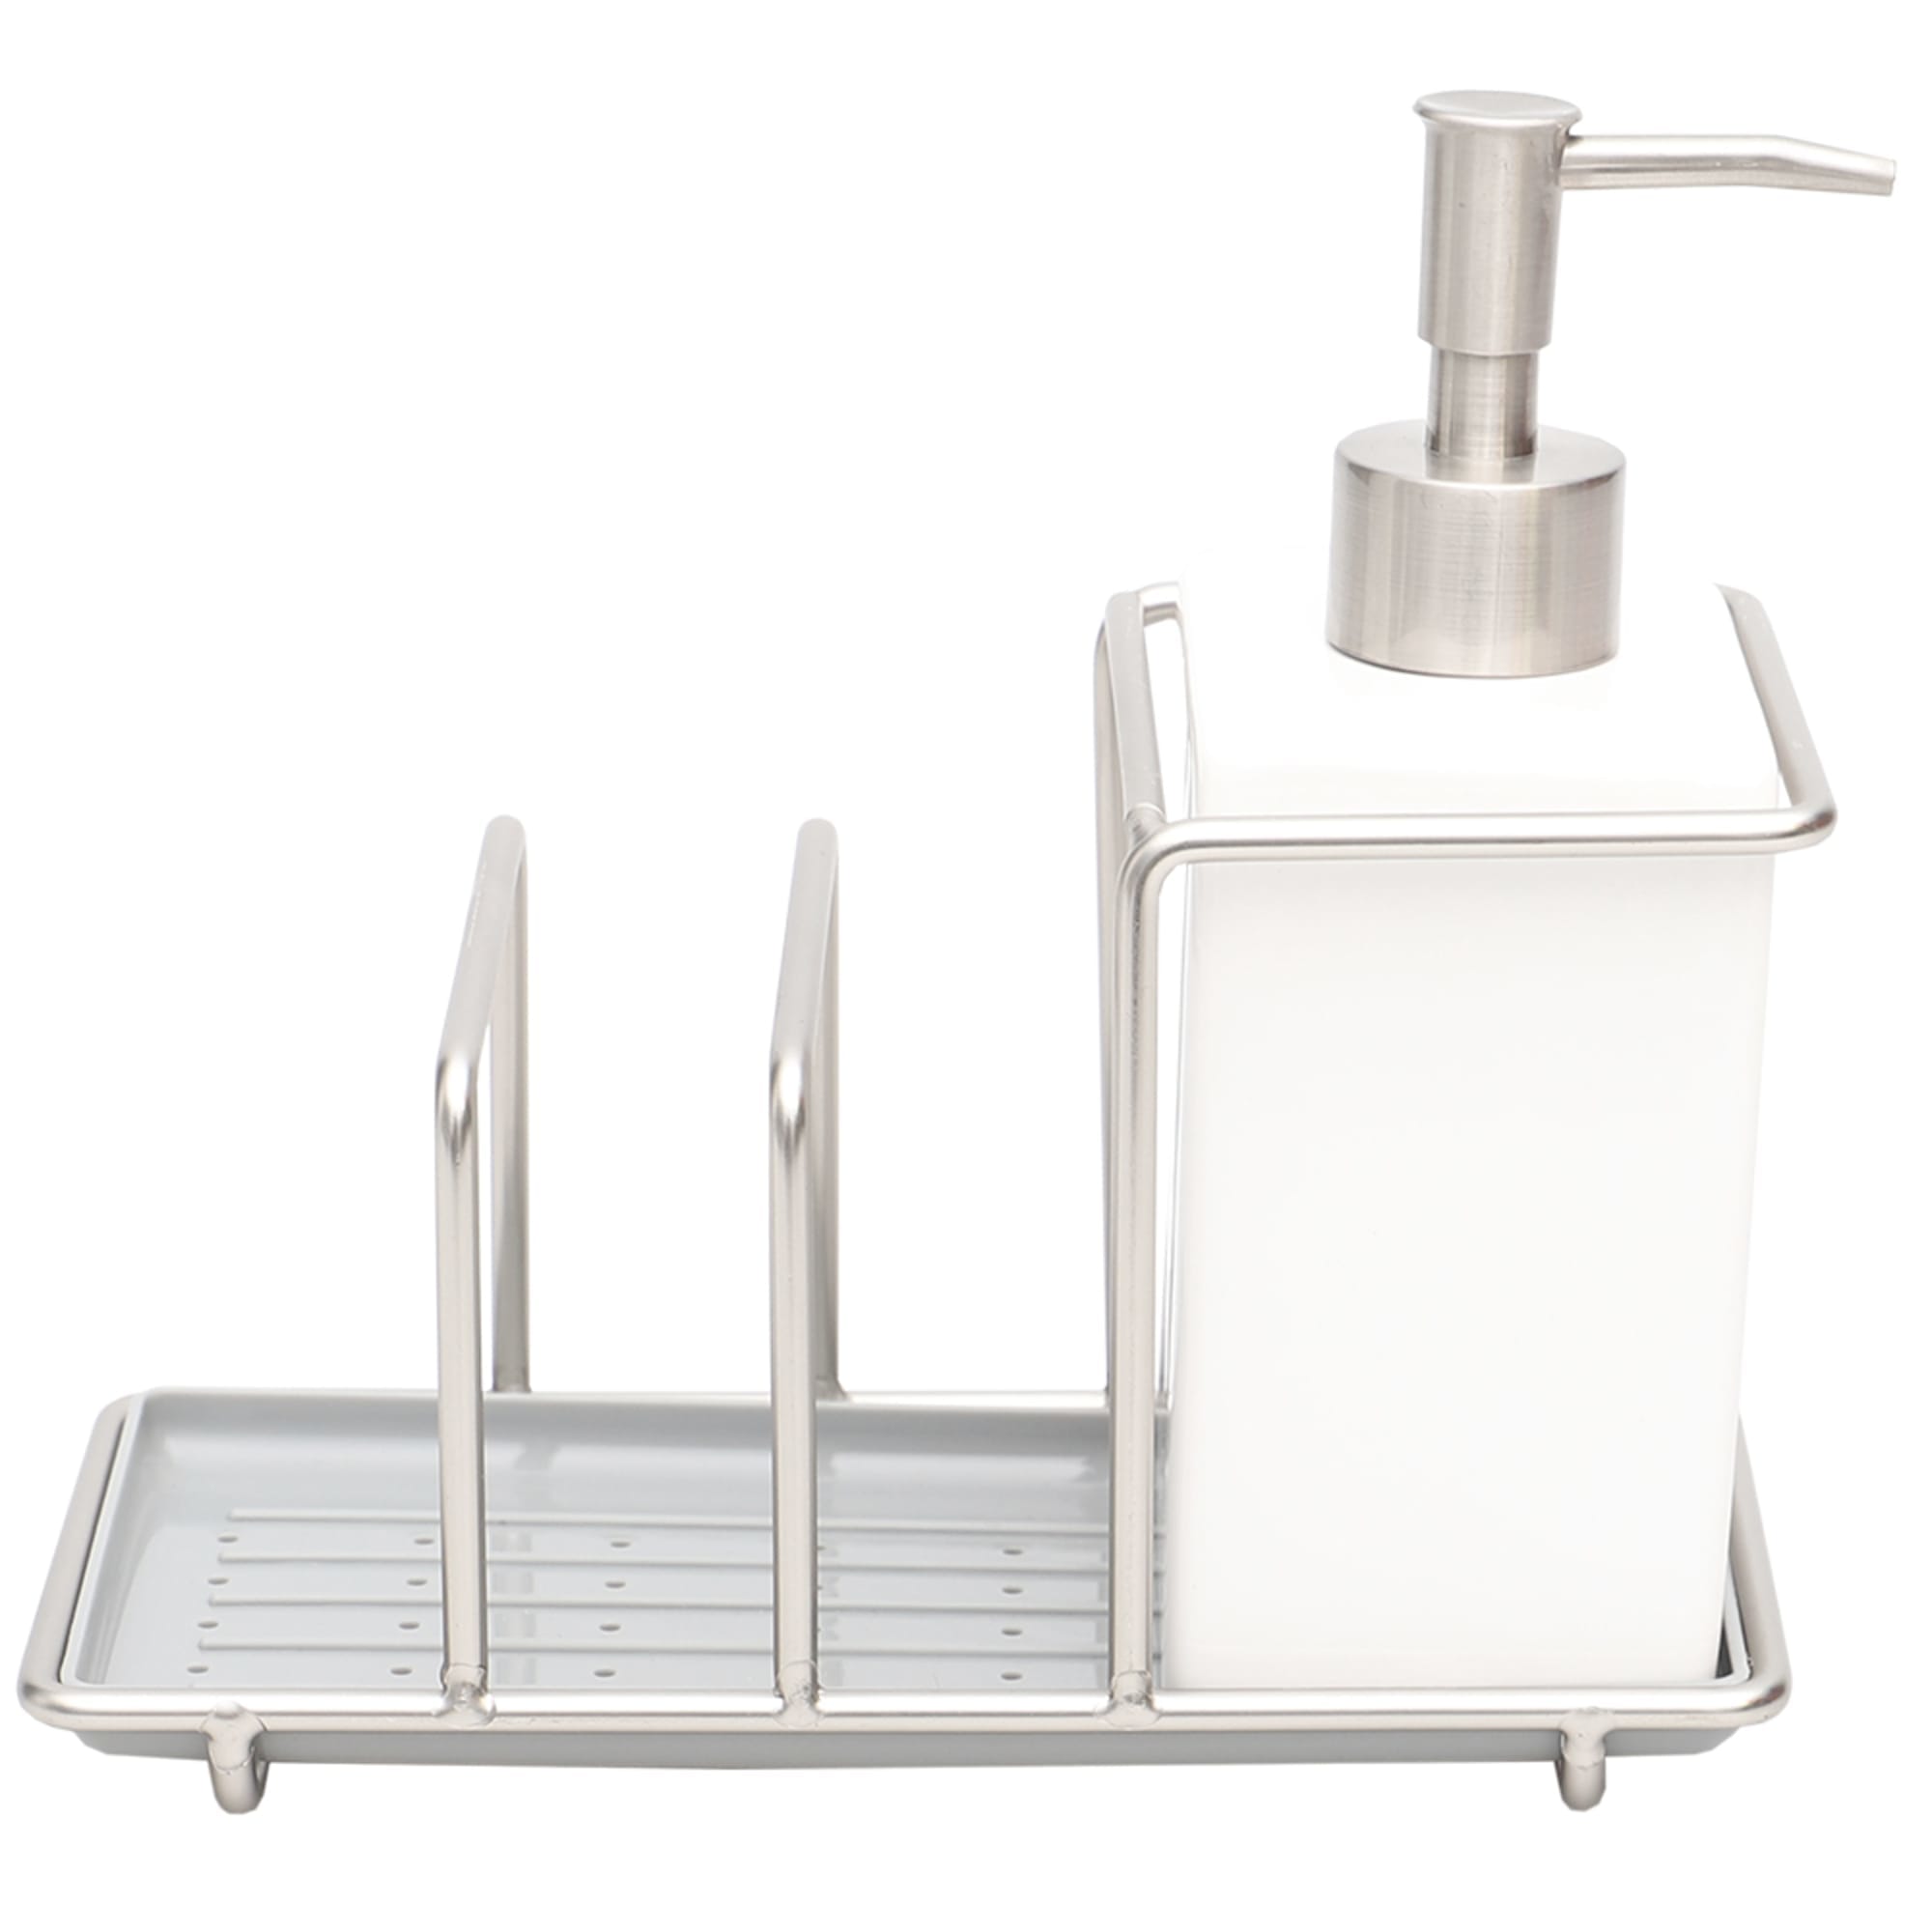 Michael Graves Design Steel Kitchen Sink Caddy Station with 10 Ounce Ceramic Soap Dispenser, Satin Nickel $10.00 EACH, CASE PACK OF 6